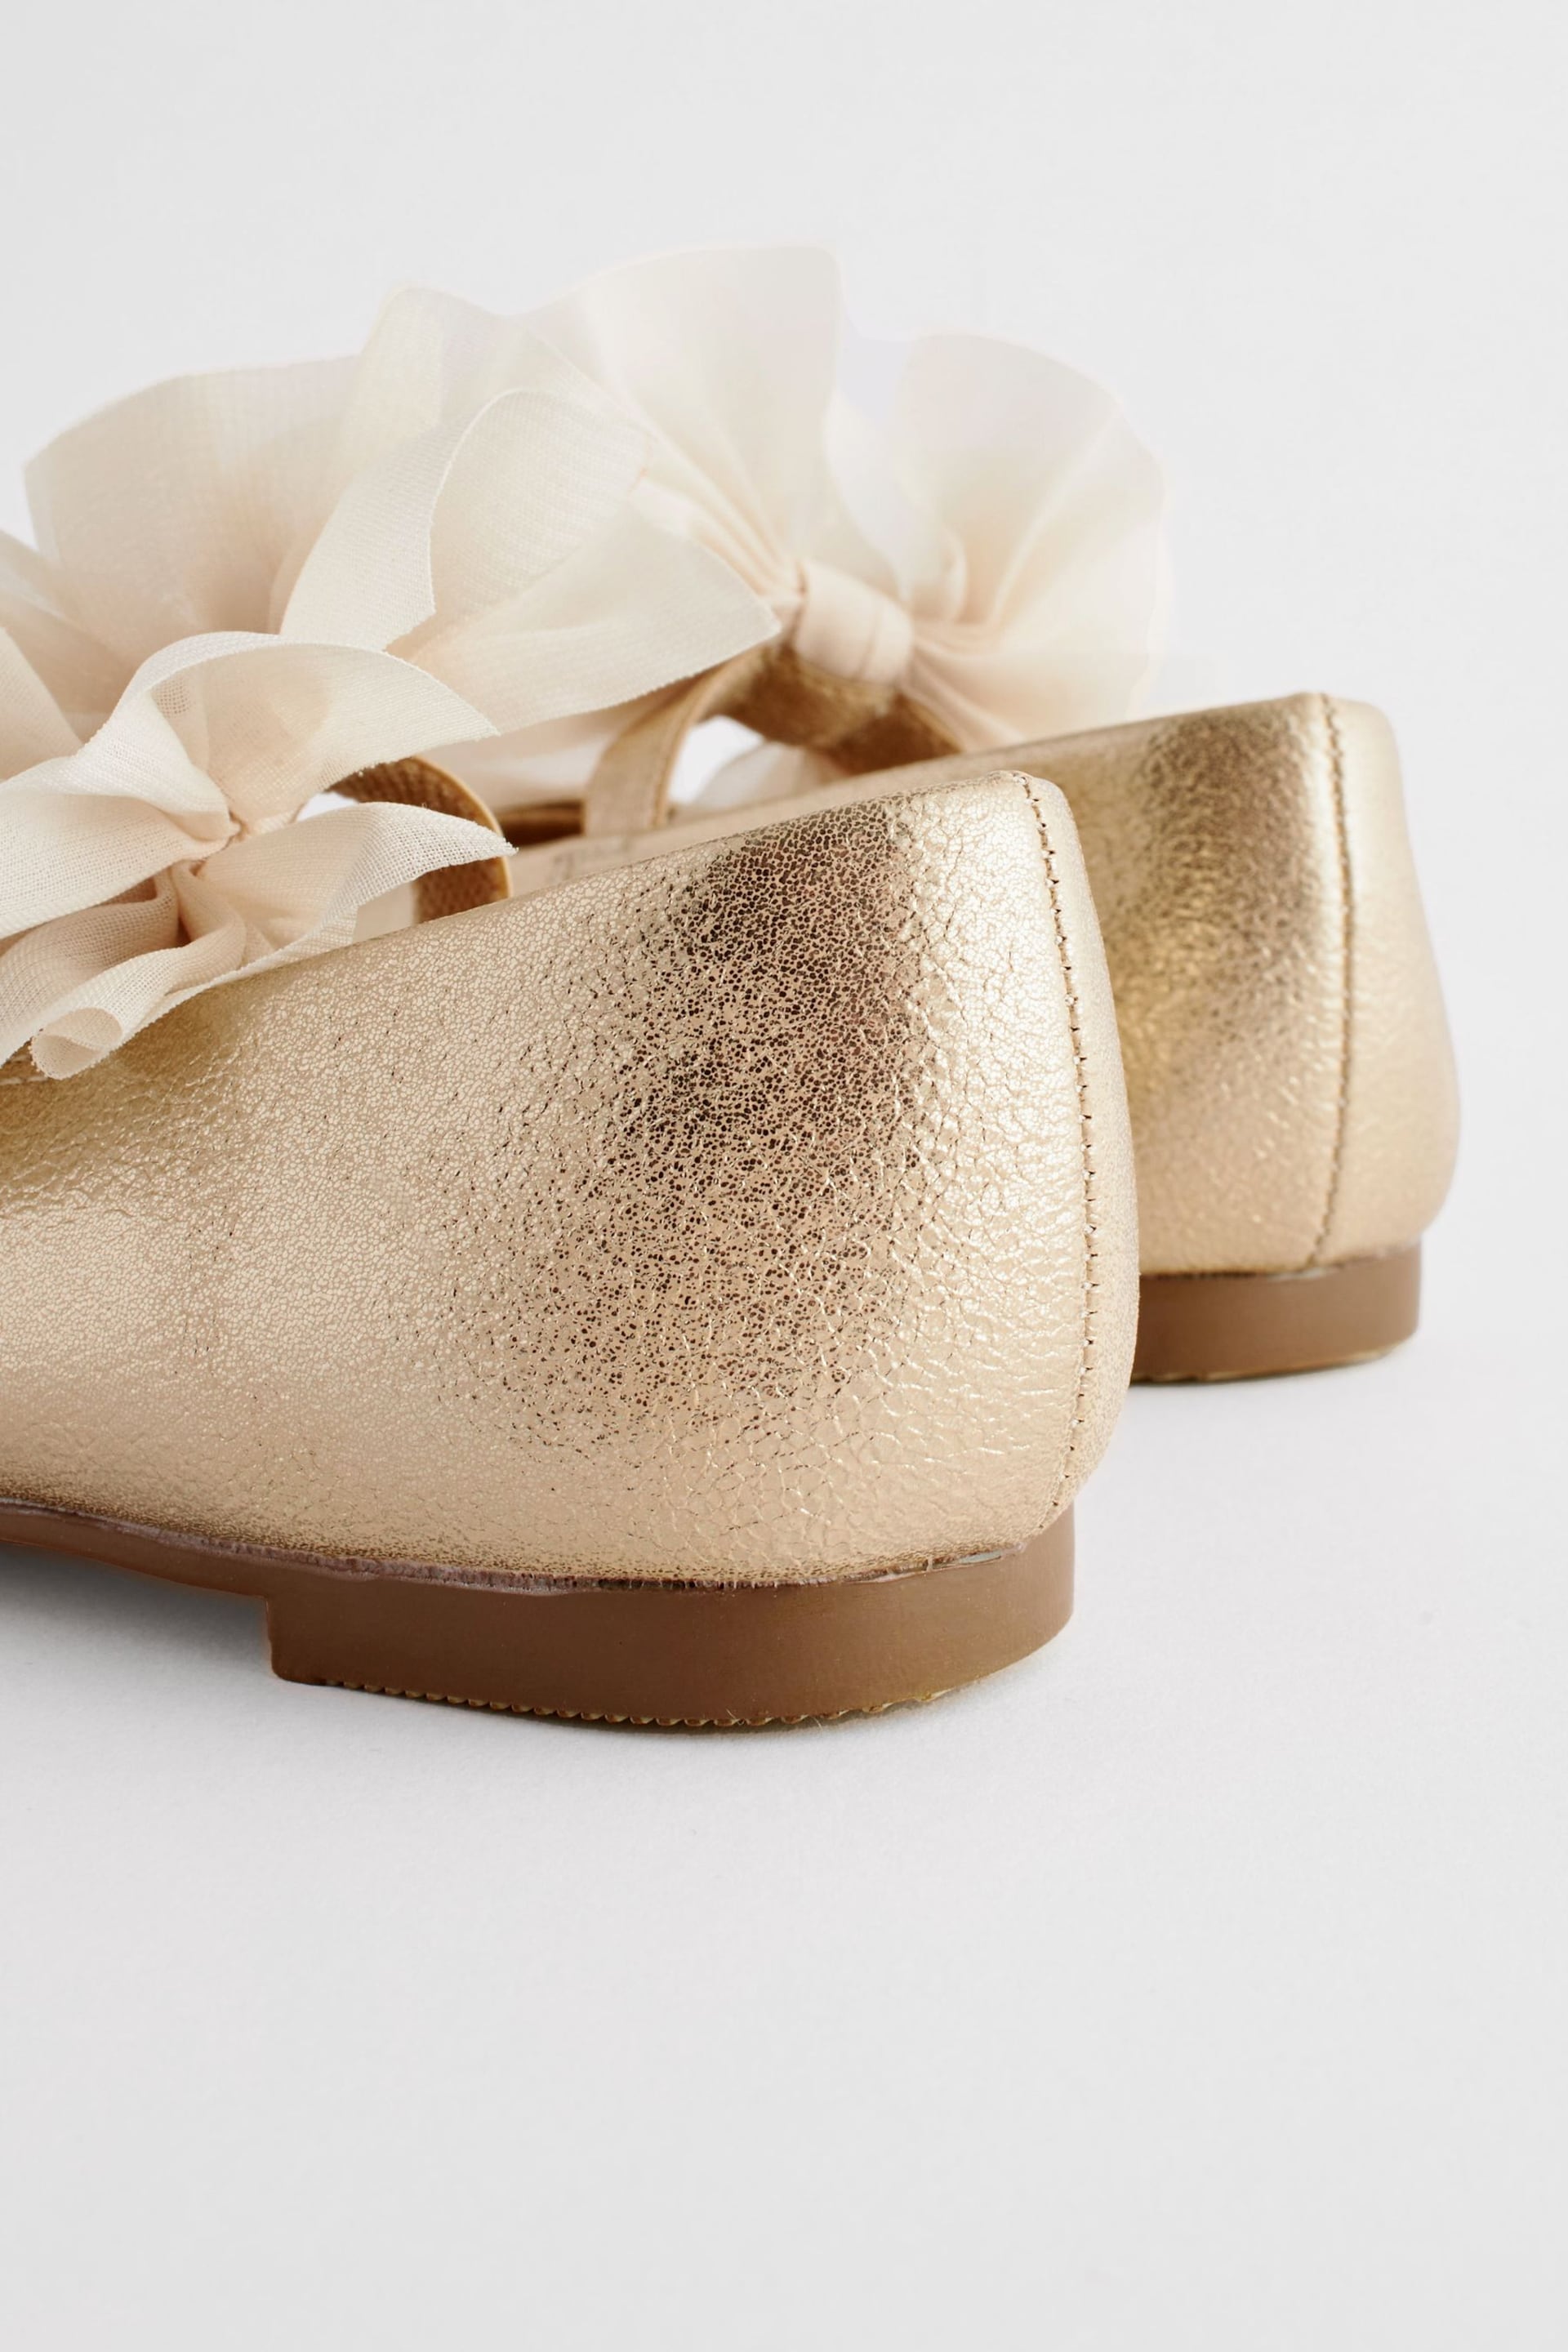 Gold Wide Fit (G) Mary Jane Bridesmaid Bow Occasion Shoes - Image 6 of 6